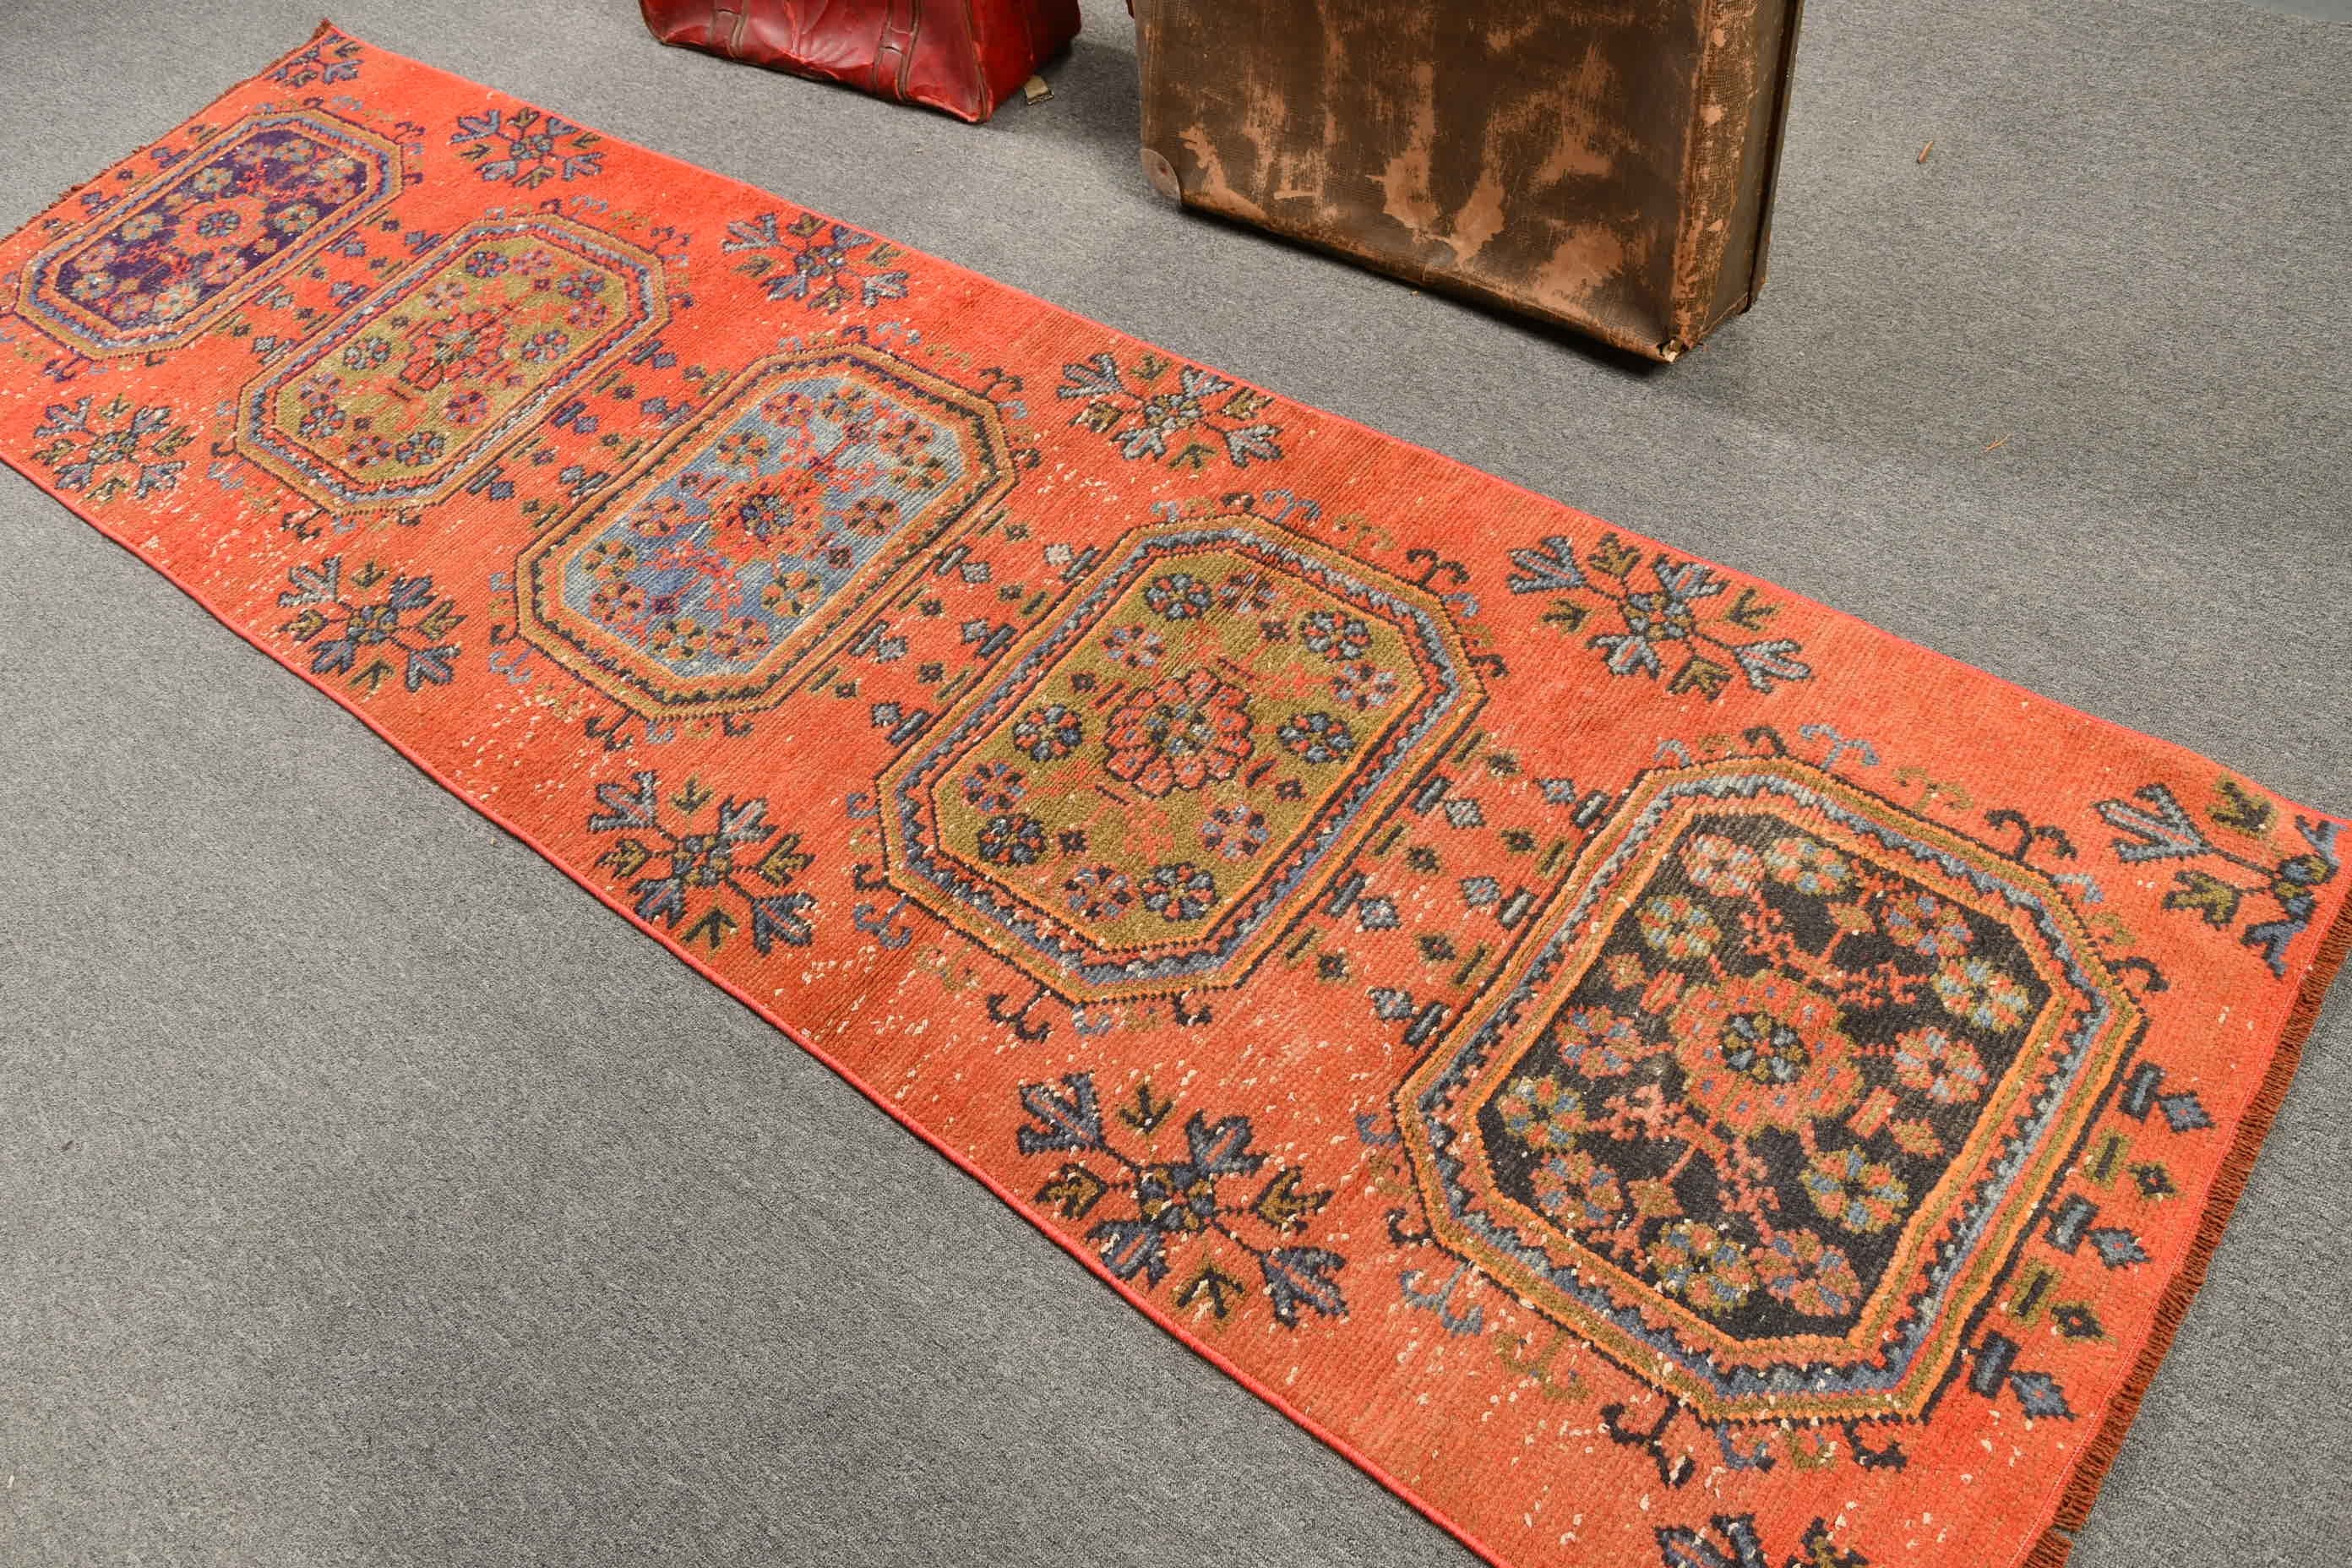 2.7x9.3 ft Runner Rugs, Turkish Rug, Red Anatolian Rug, Kitchen Rug, Rugs for Kitchen, Hallway Rugs, Vintage Rugs, Anatolian Rug, Dorm Rugs